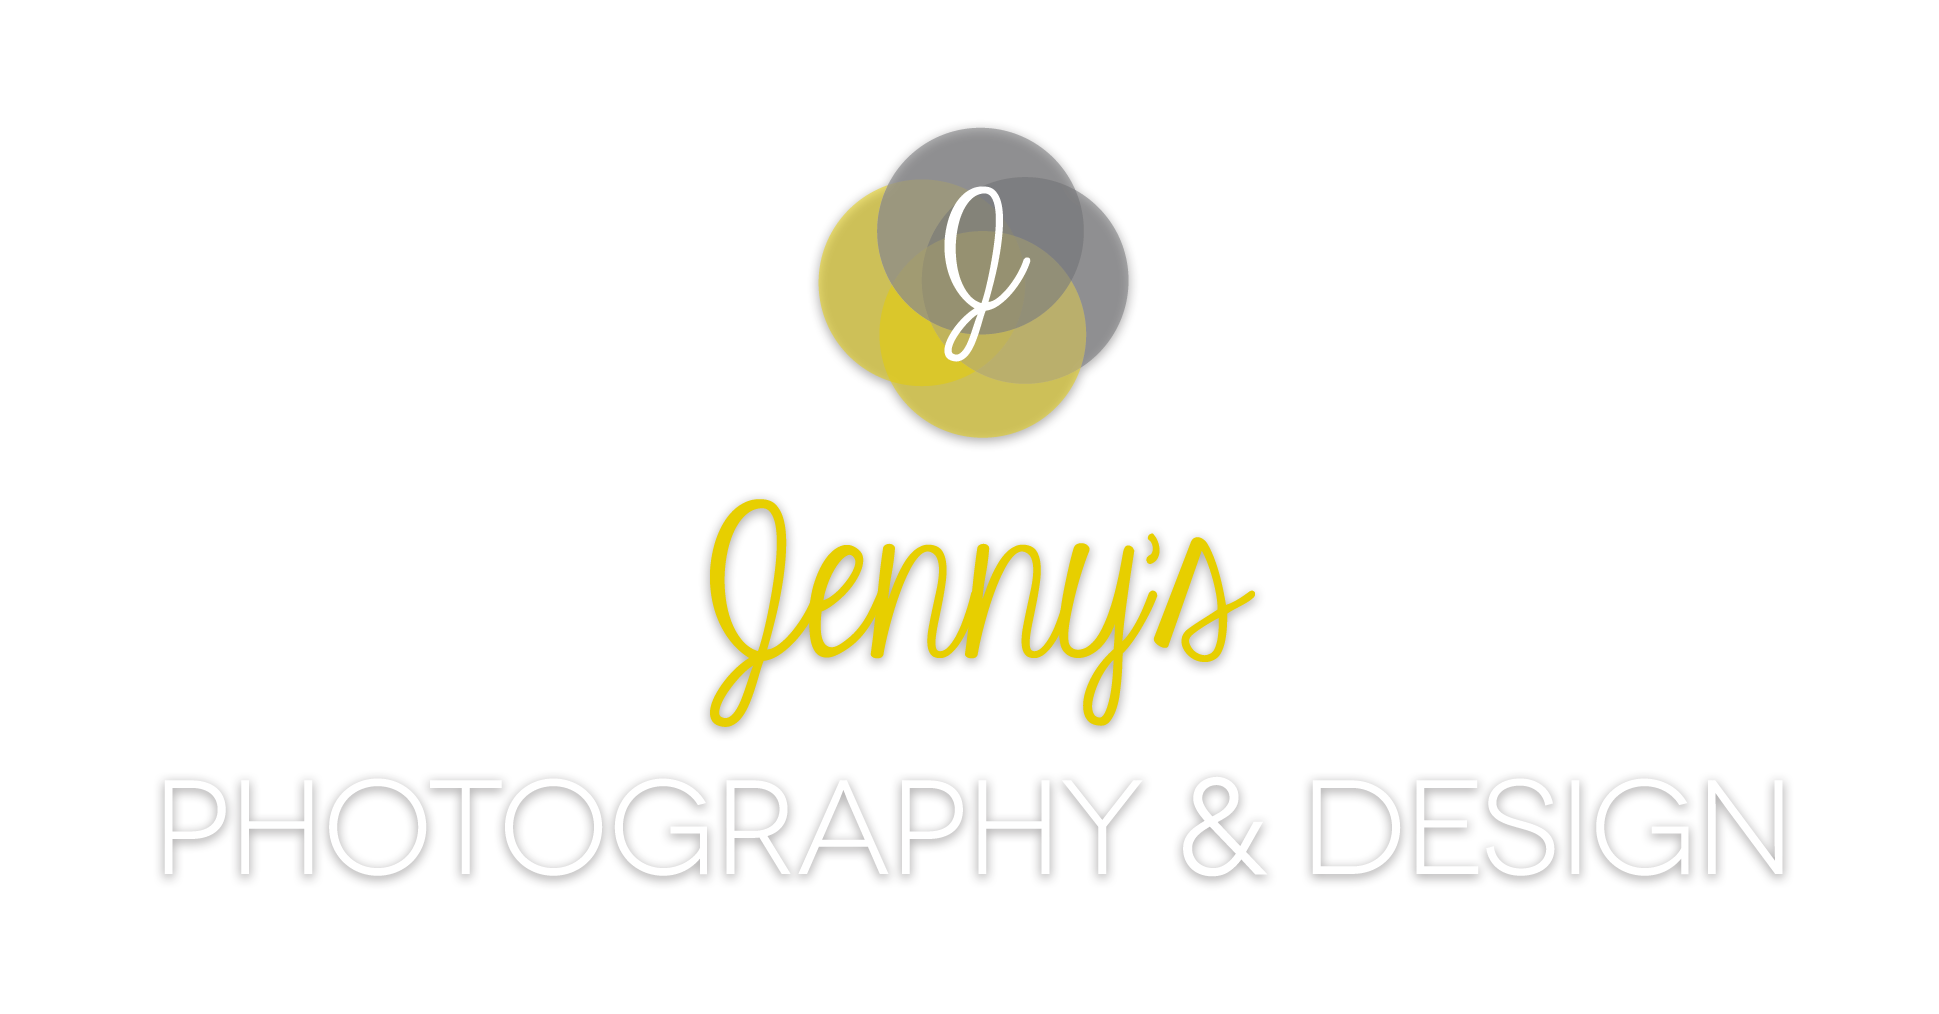 Jenny's Photography and Design